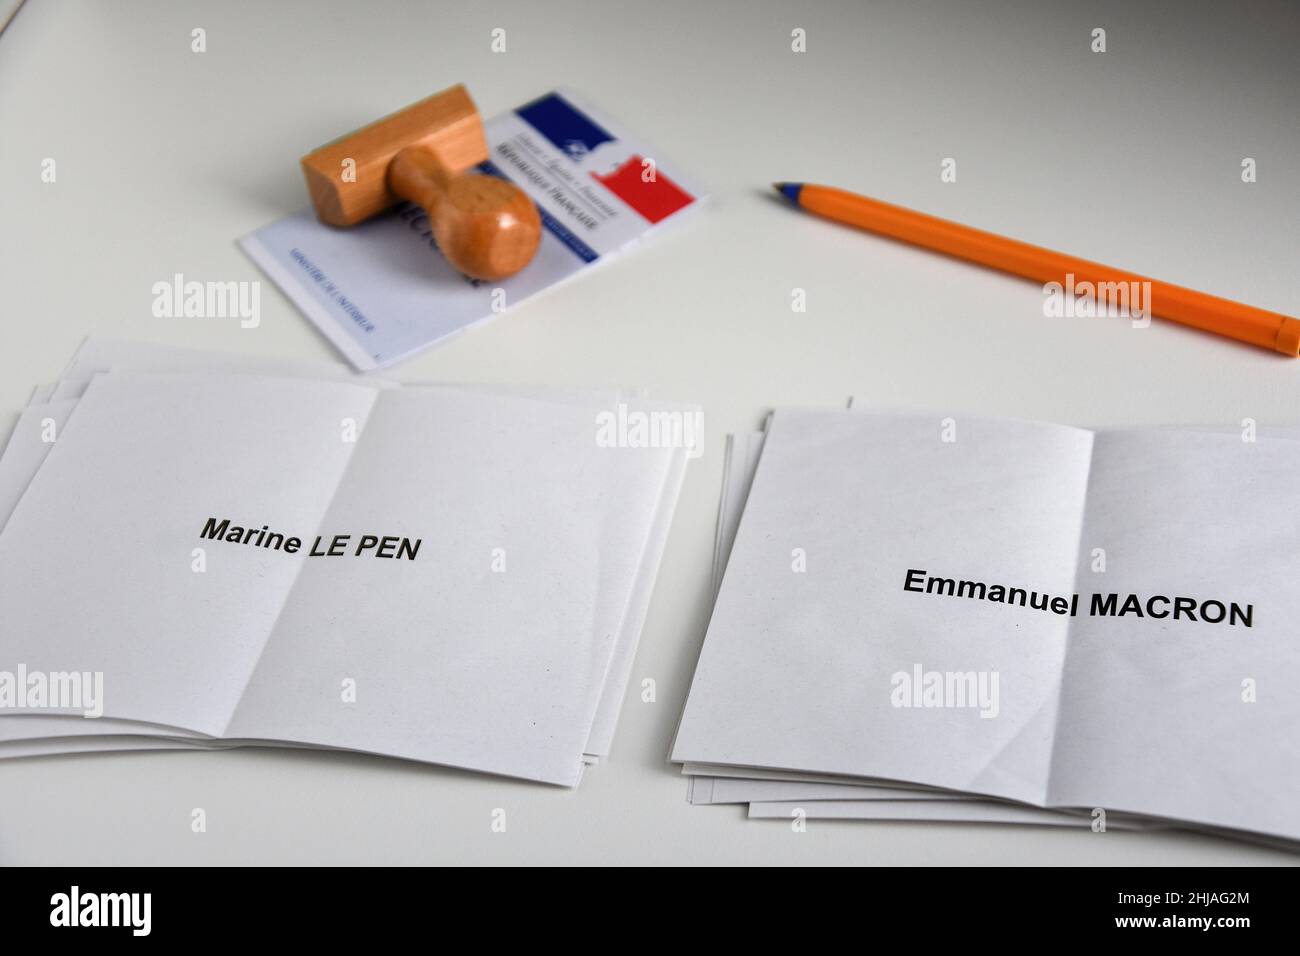 In this photo illustration, ballot papers of Marine Le Pen and Emmanuel Macron are seen displayed on a table with a voters card, a stamp and a pen. Despite not officially being a candidate for re-election, the President of the French Republic, Emmanuel Macron is leading the polls for the presidential elections of 2022 with 25% of the voting intentions, putting him ahead of Marine Le Pen of the Rassemblement National (RN or National Rally) party, who polled only 17%. The first round of France's Presidential election will take place on April 10, 2022. Stock Photo